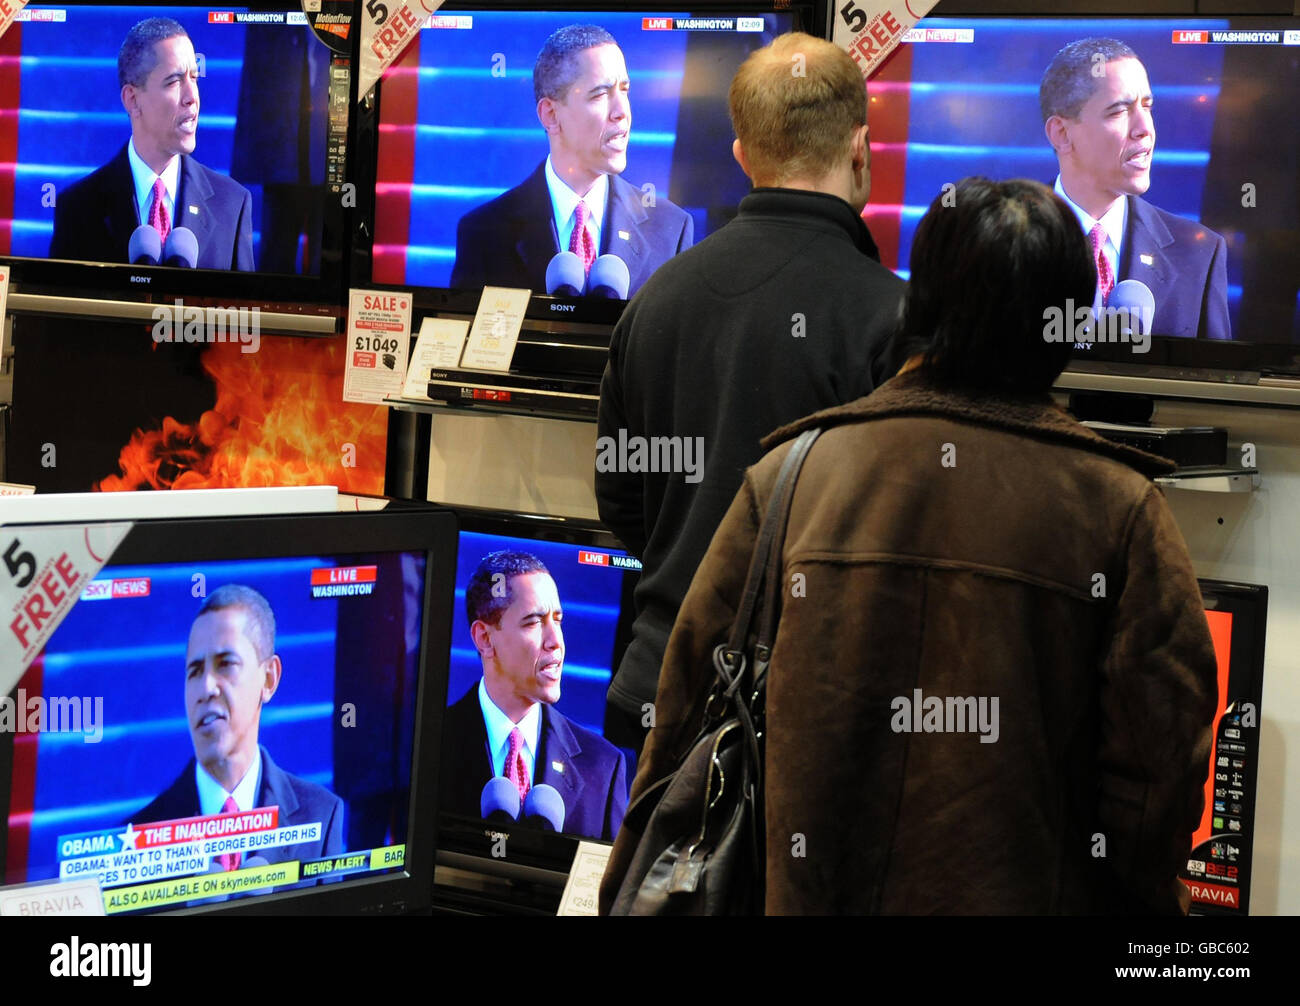 Customers watch the Barack Obama makes his presidential inauguration speech at an electrical store in Chelmsford, Essex. Stock Photo